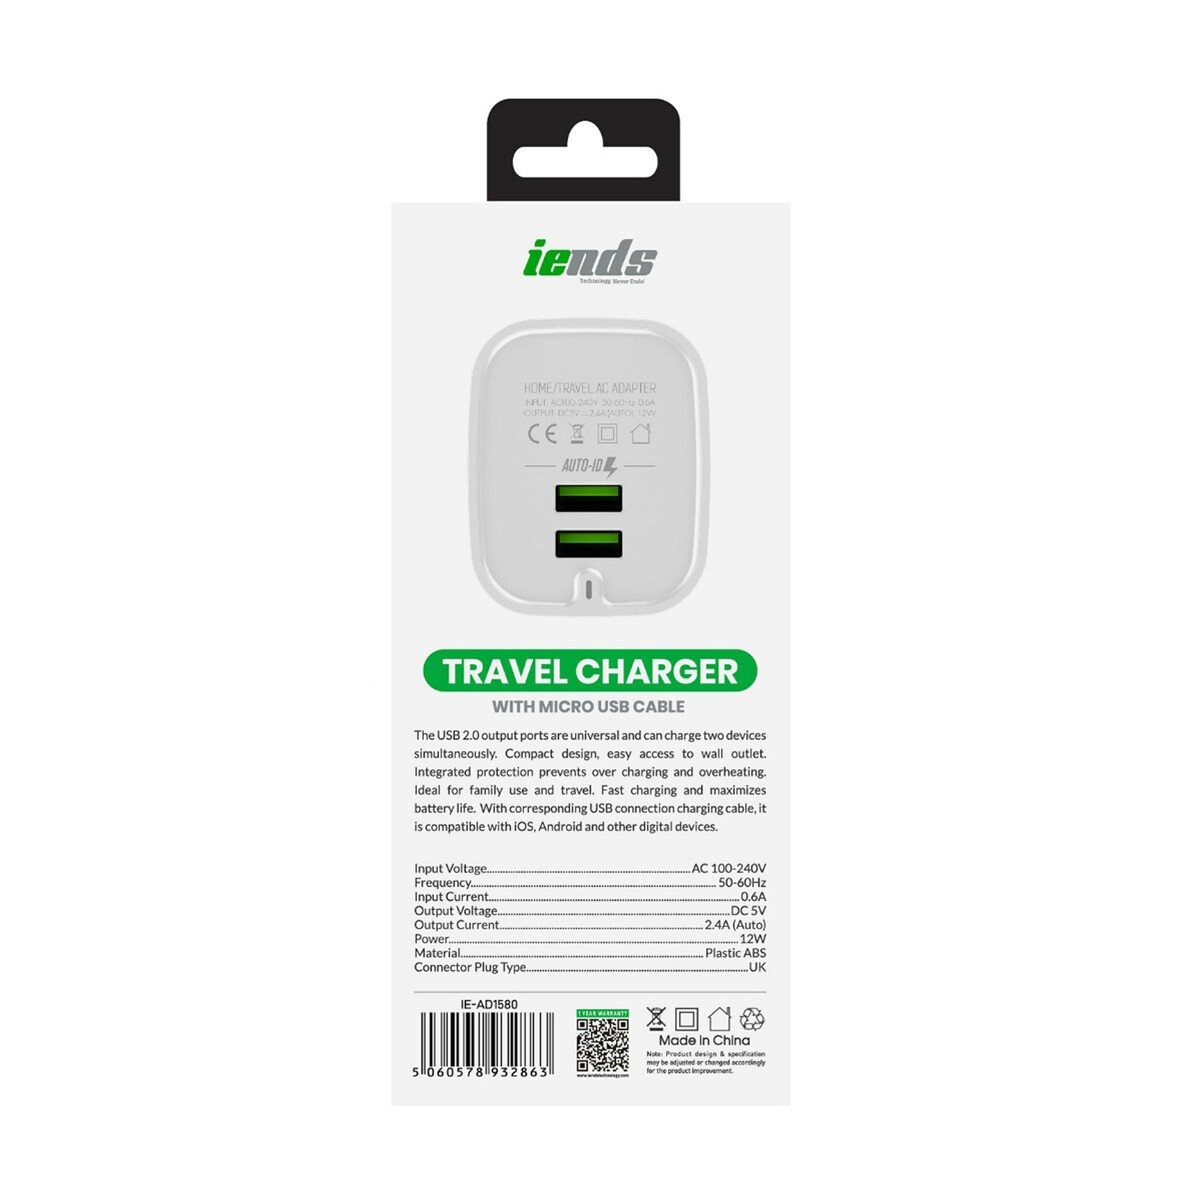 Iends USB Smart Charger AD1580